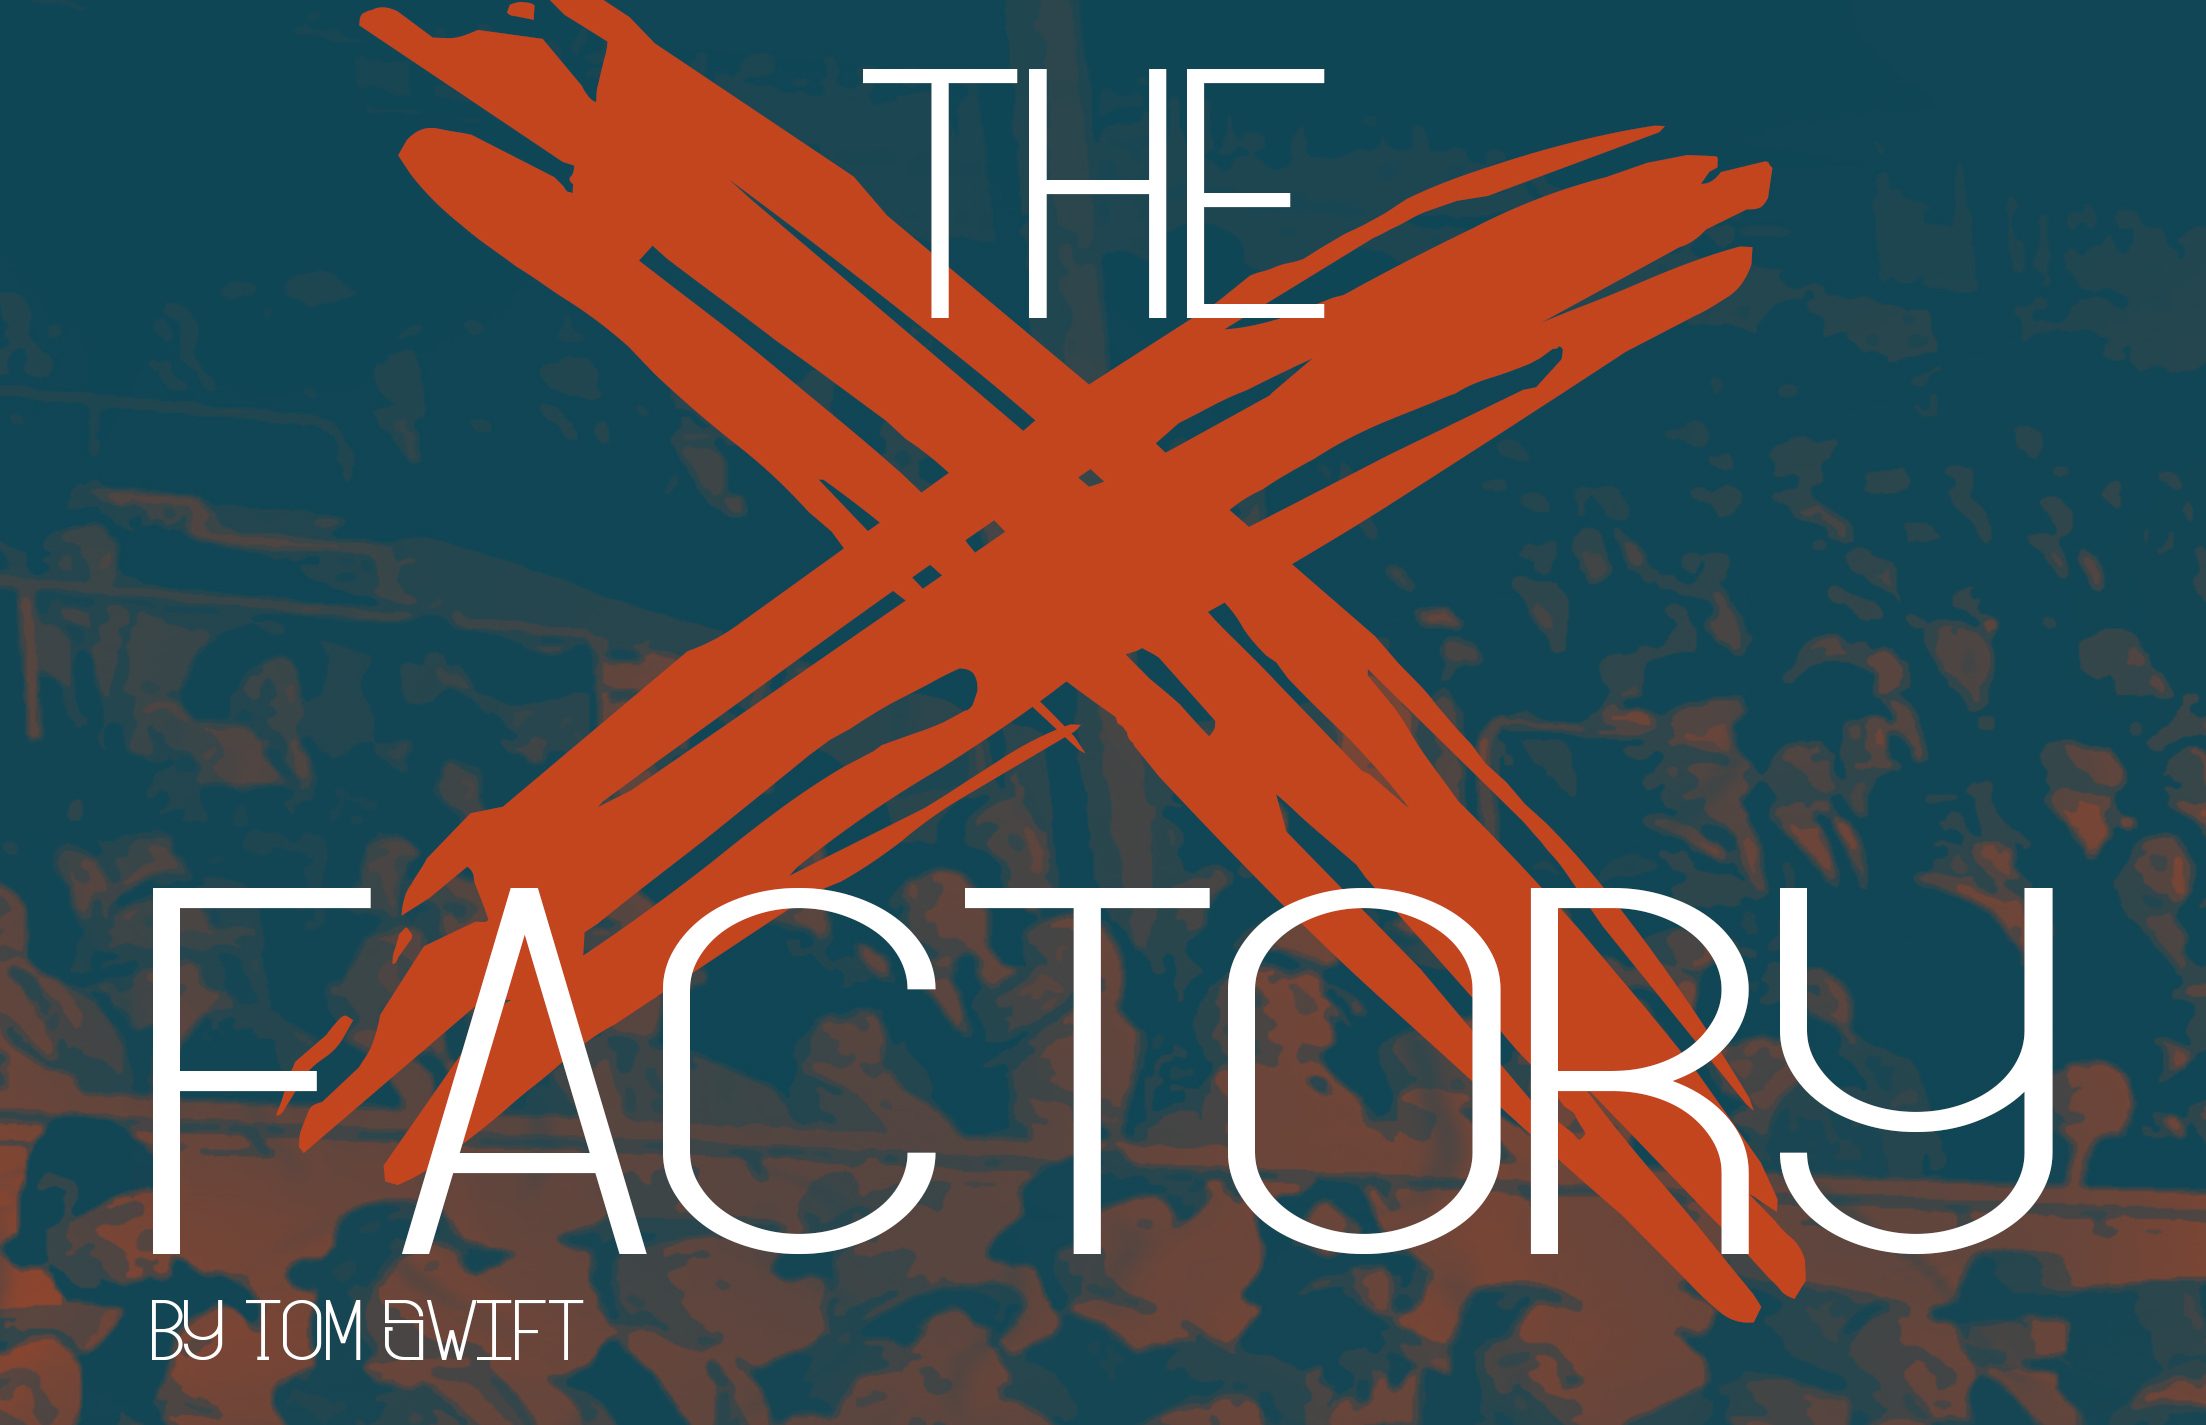 The X-Factory